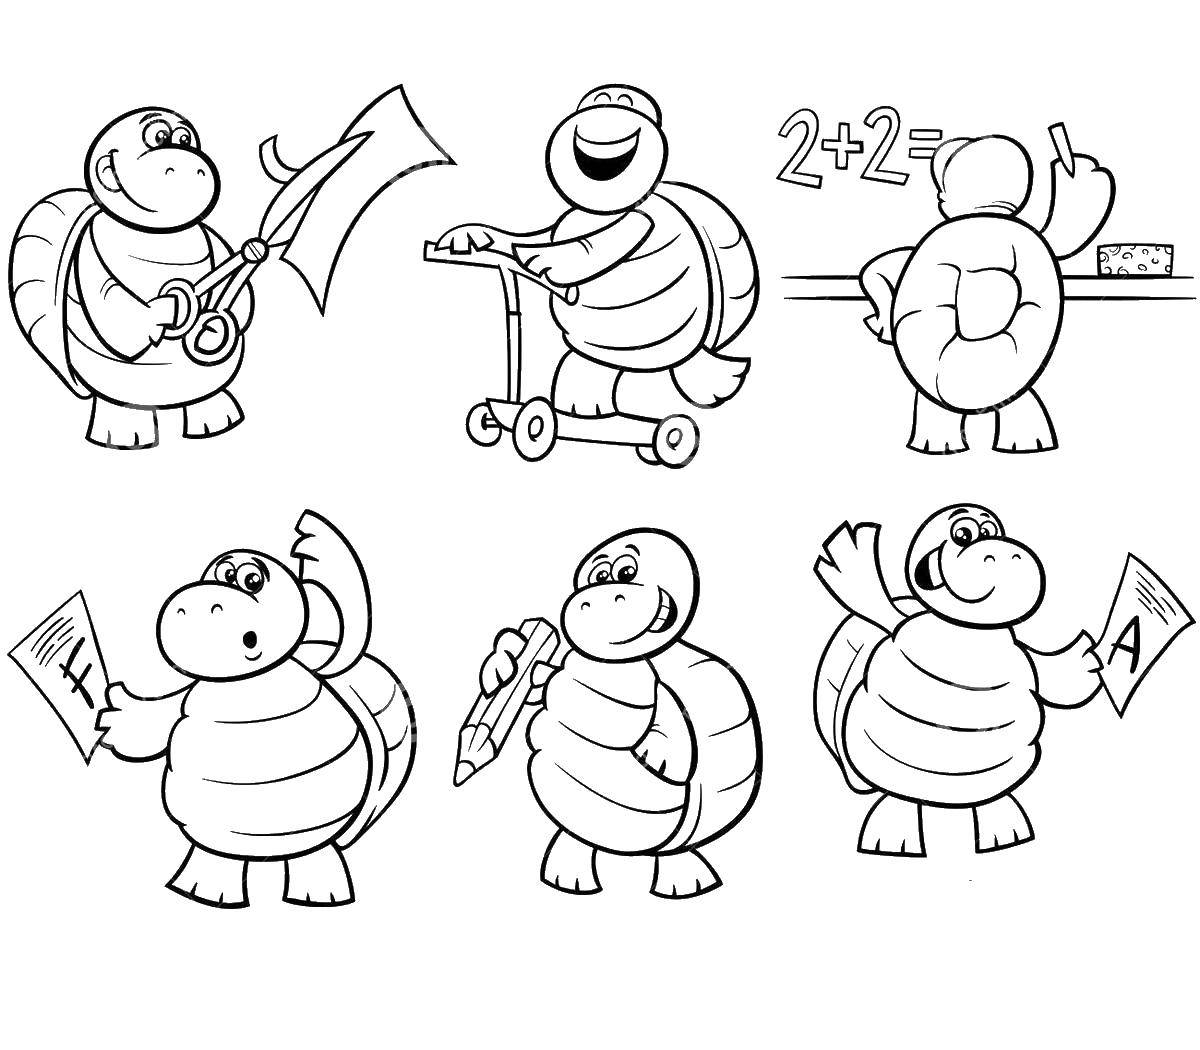 Coloring Turtles at school. Category school. Tags:  School, class, lesson, children.